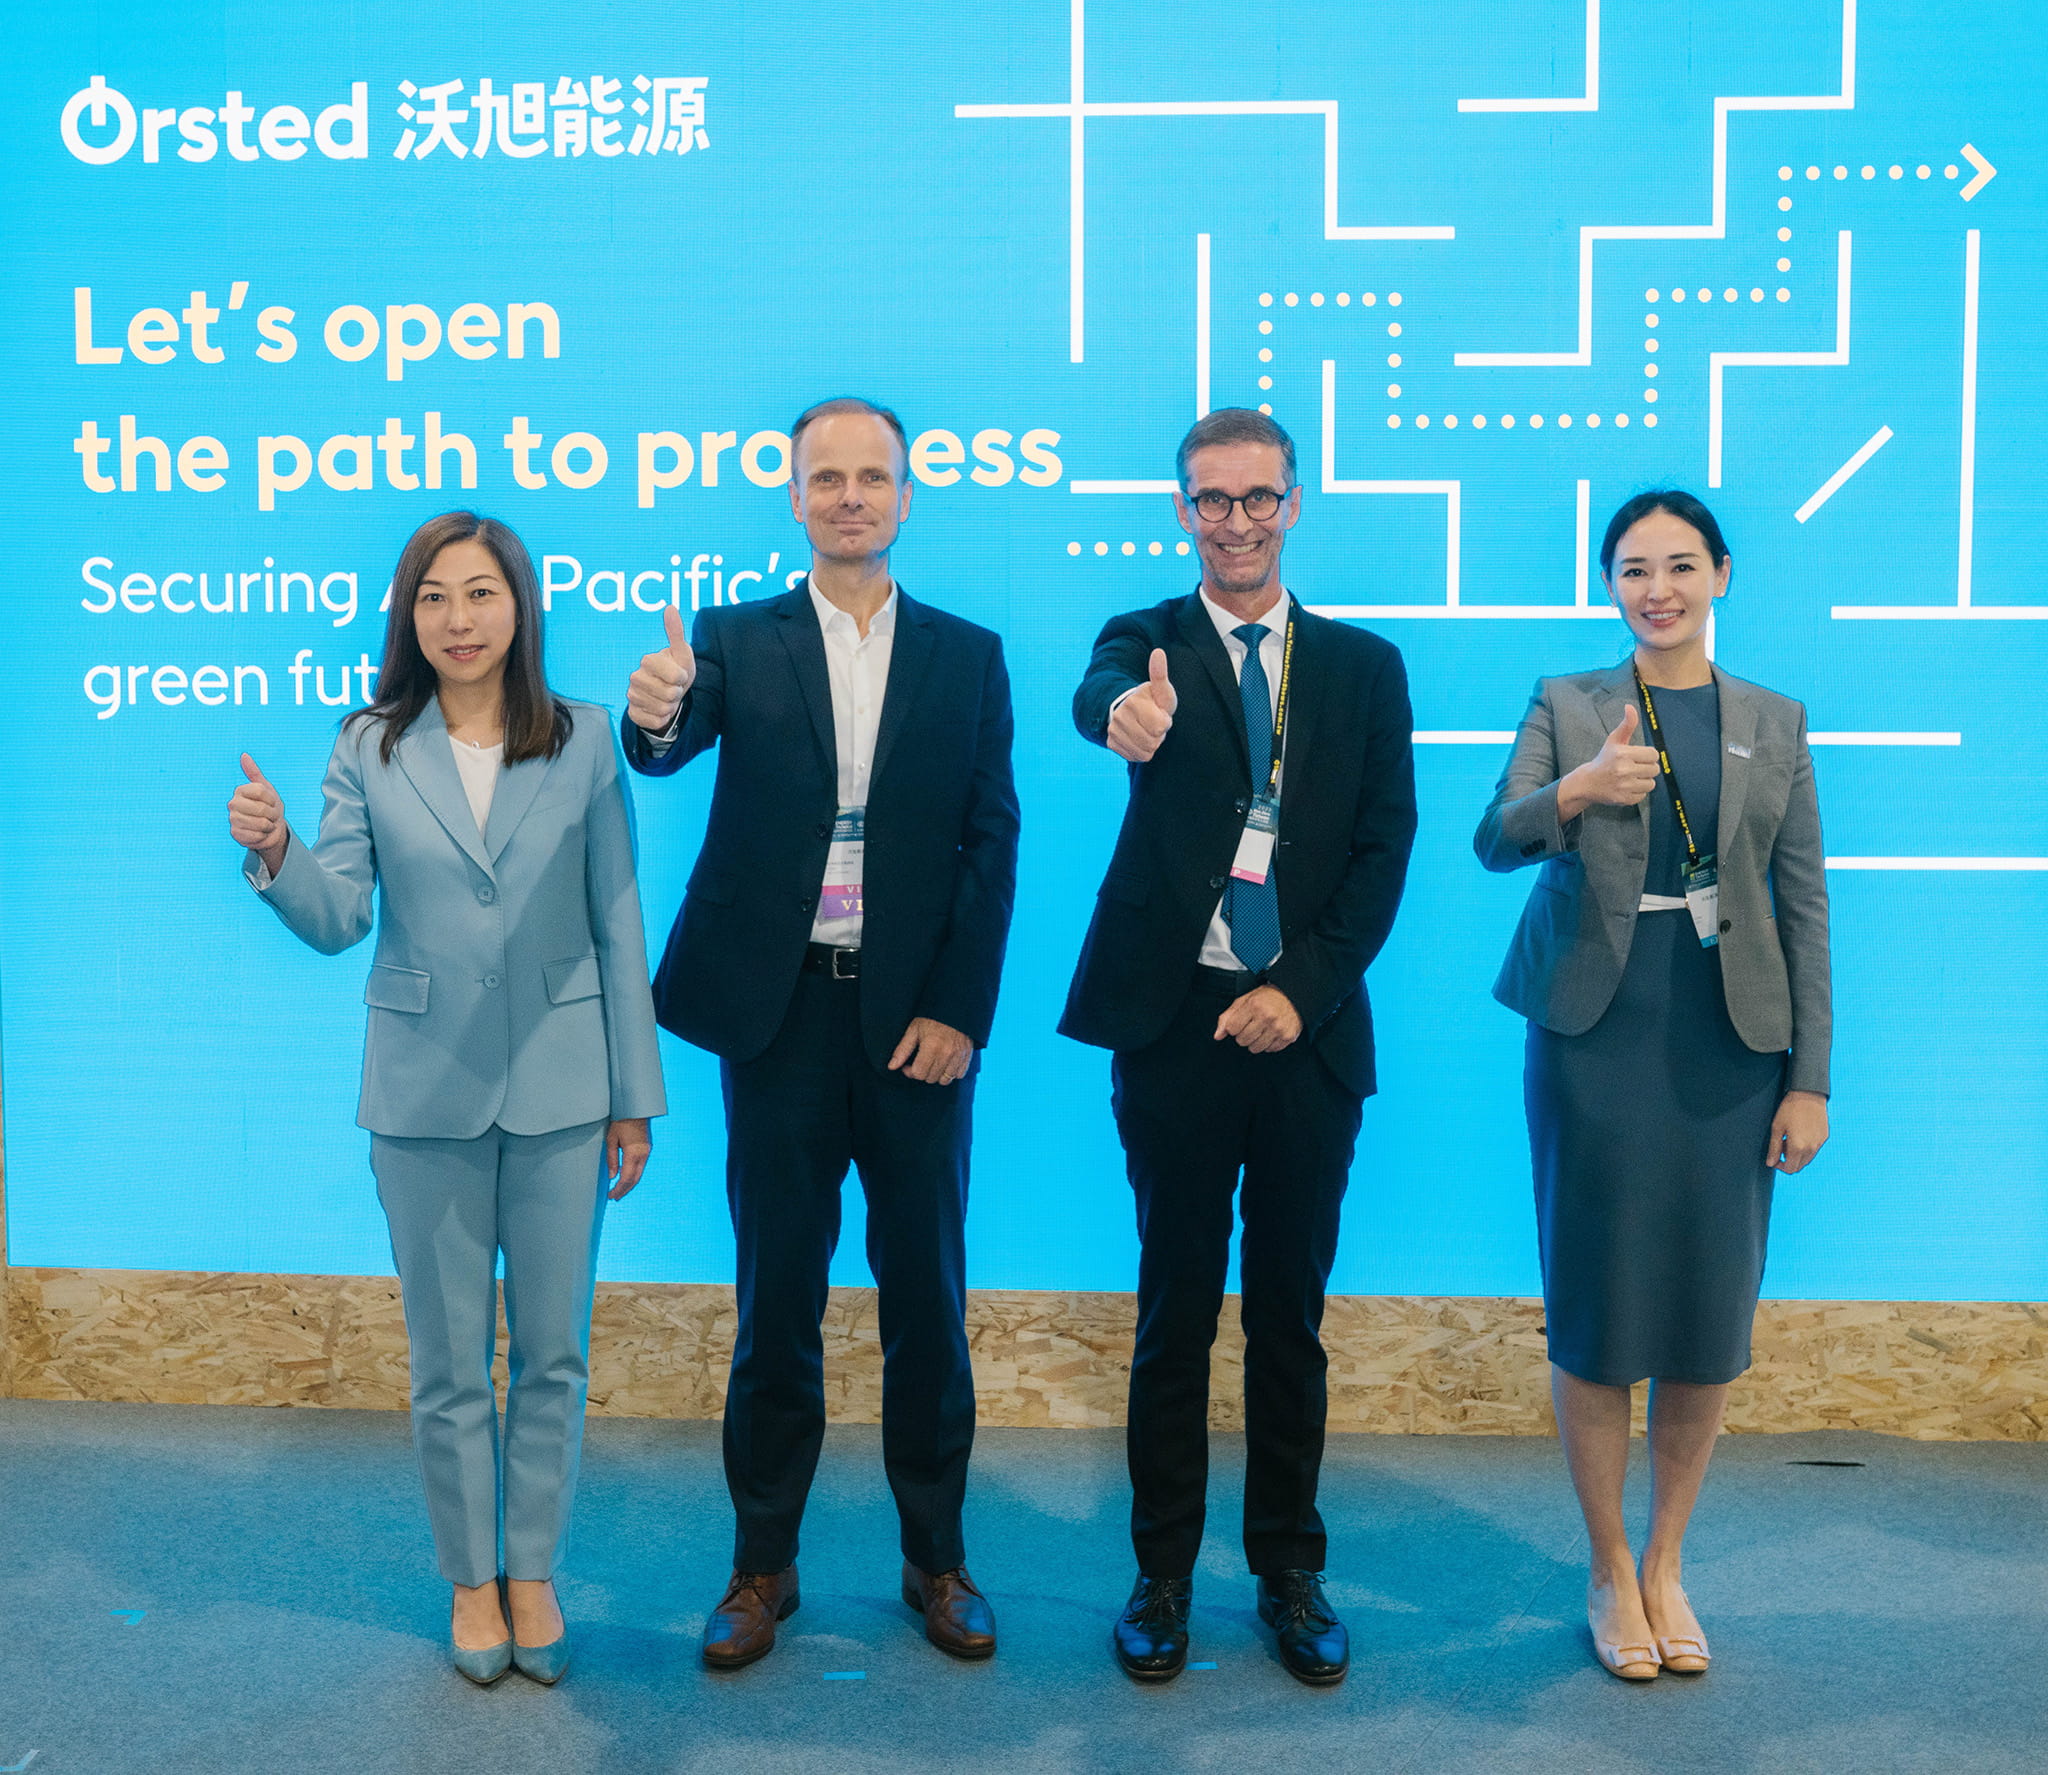 L-R: Launch event at Energy Taiwan with Ørsted Taiwan Chairperson Christy Wang, President of Asia Pacific Per Mejnert Kristensen, Director of the Trade Council of Denmark, Taipei Peter Sand and Head of Taiwan Regulatory and Public Affairs Viola Lin.